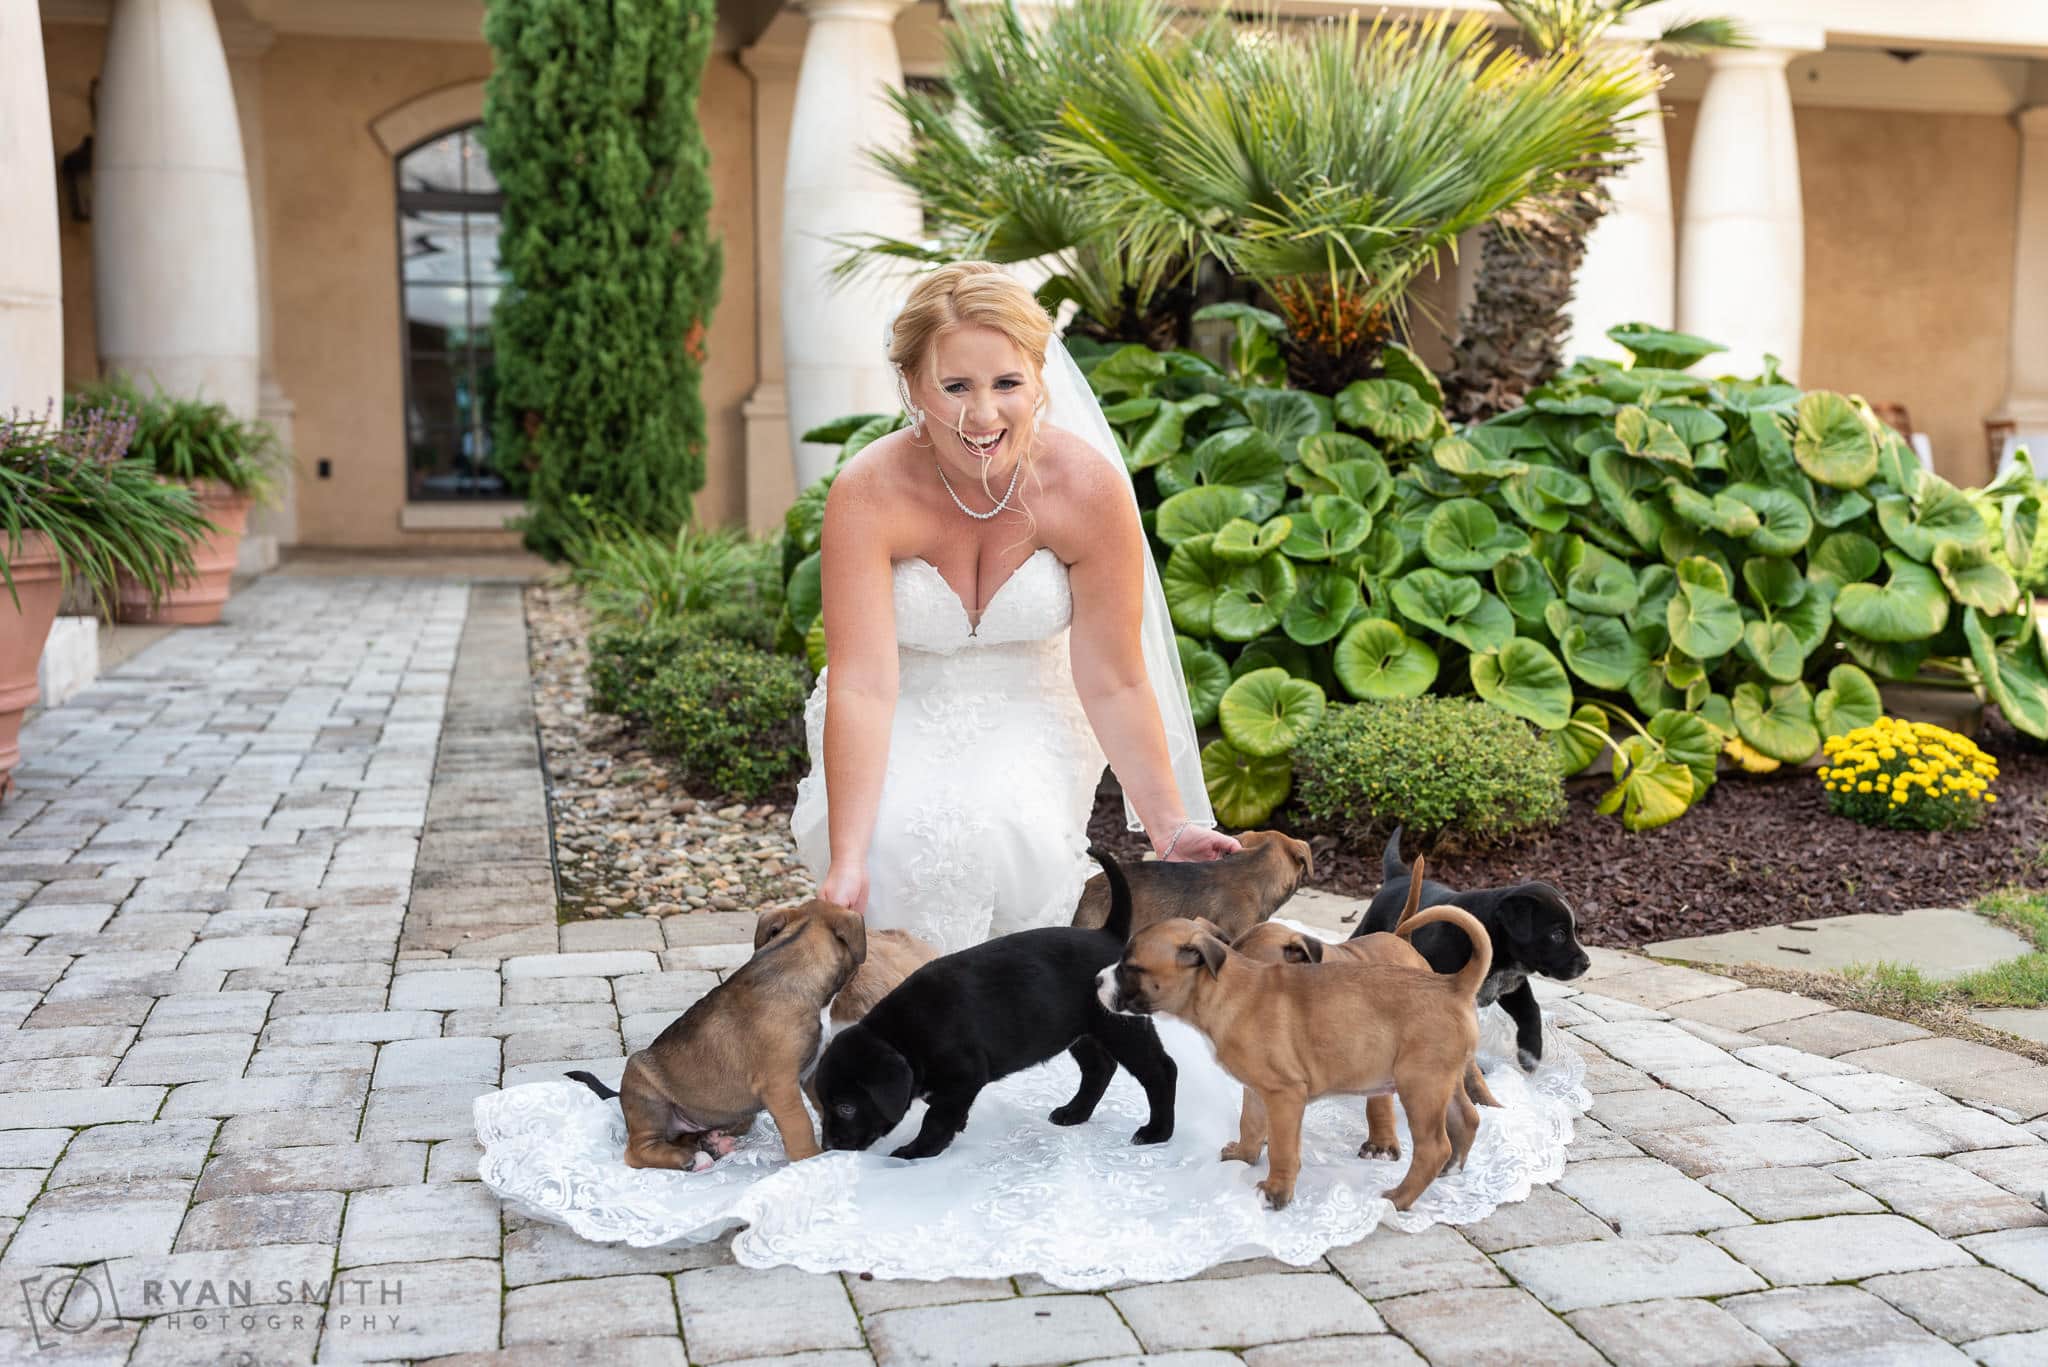 Bride with puppies on her dress - 21 Main Events - North Myrtle Beach